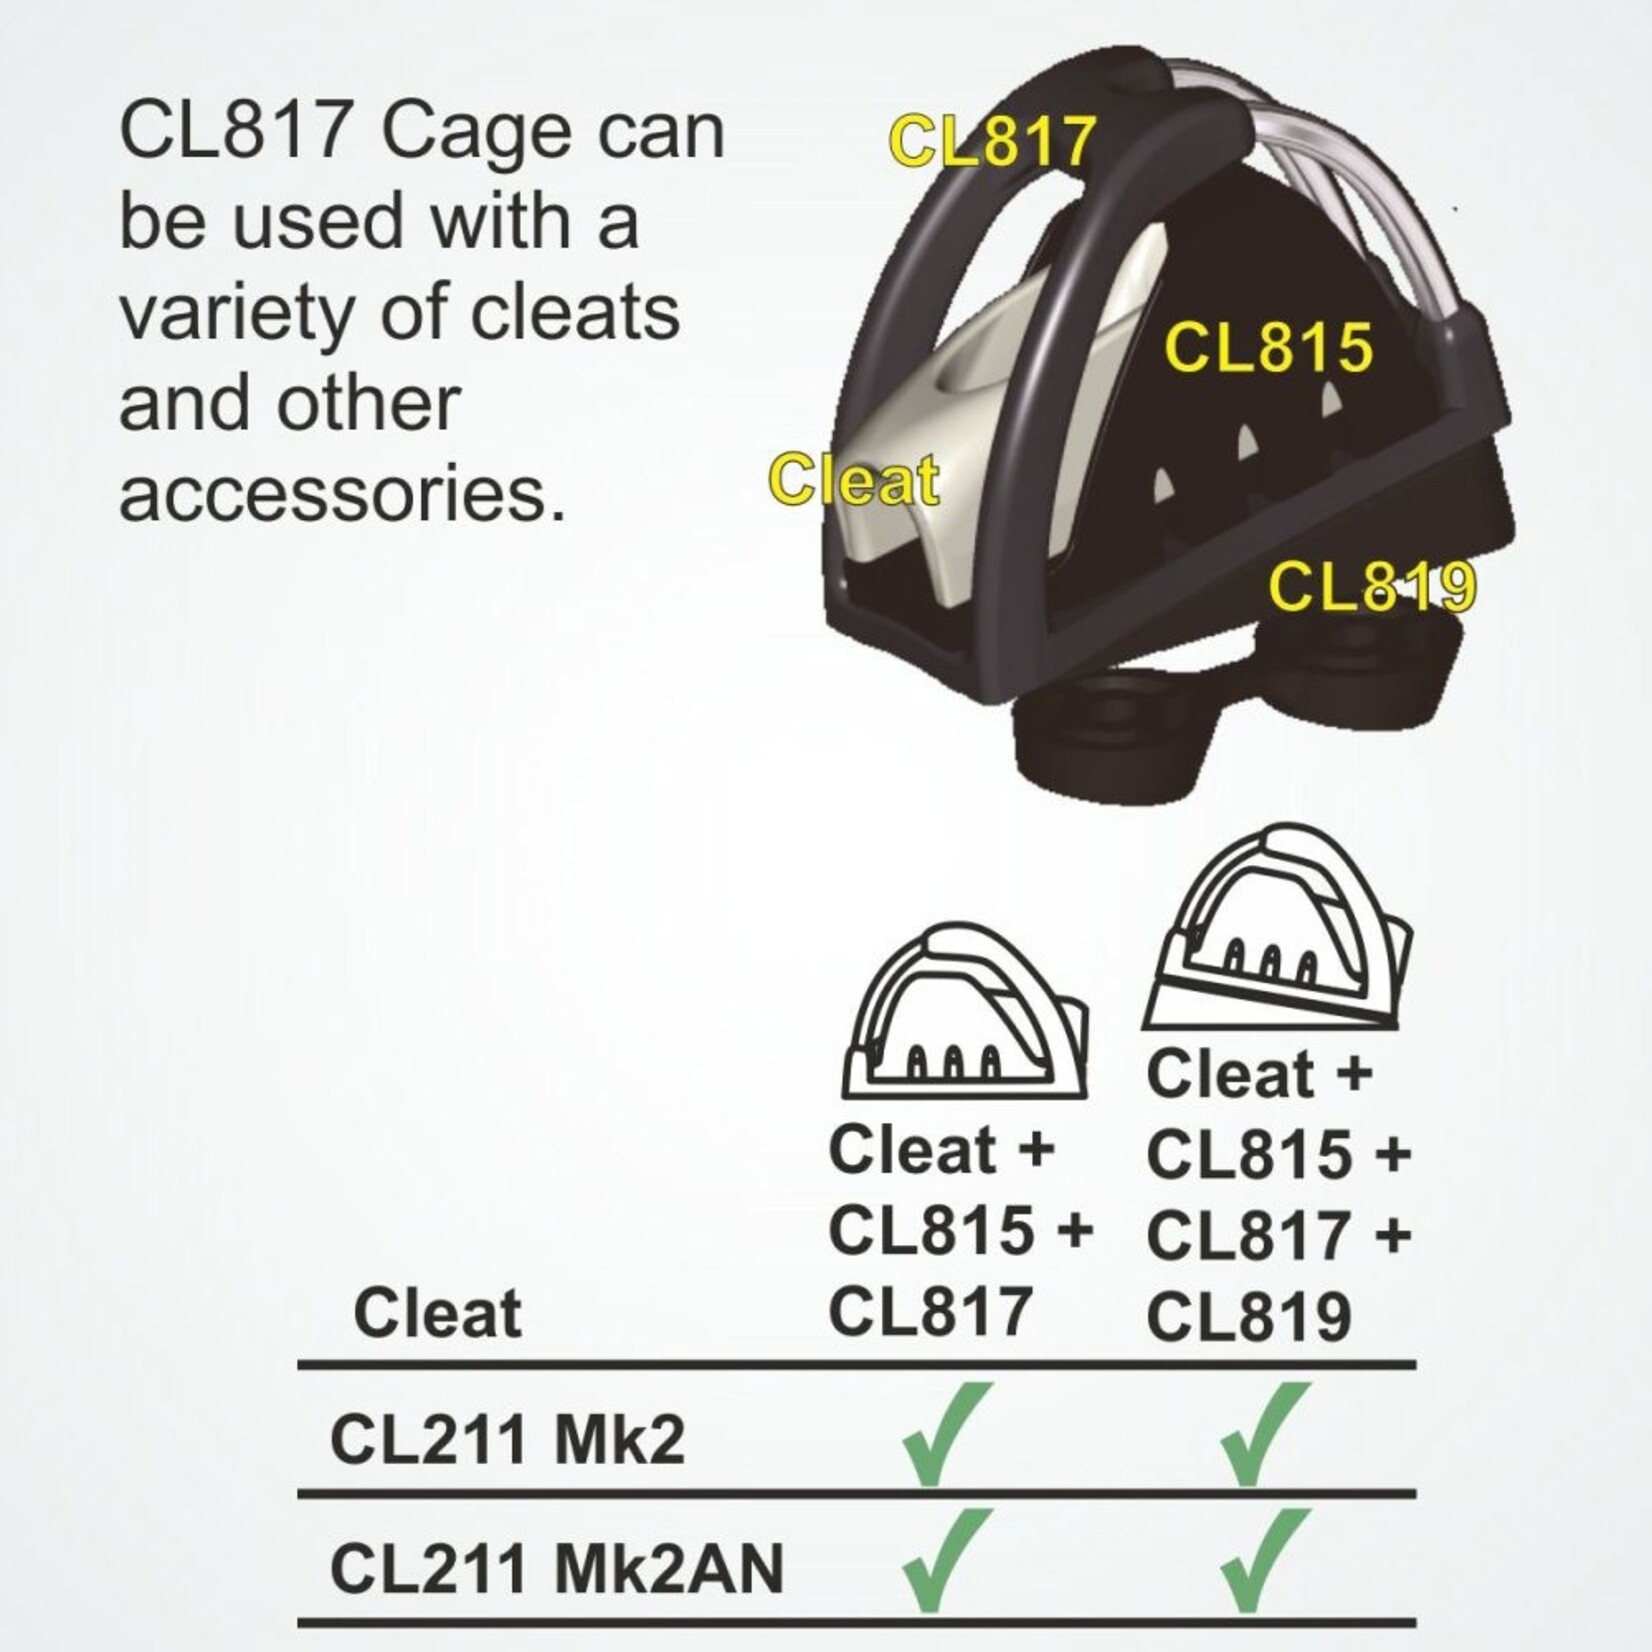 Clamcleat Cage for CL211 MK2